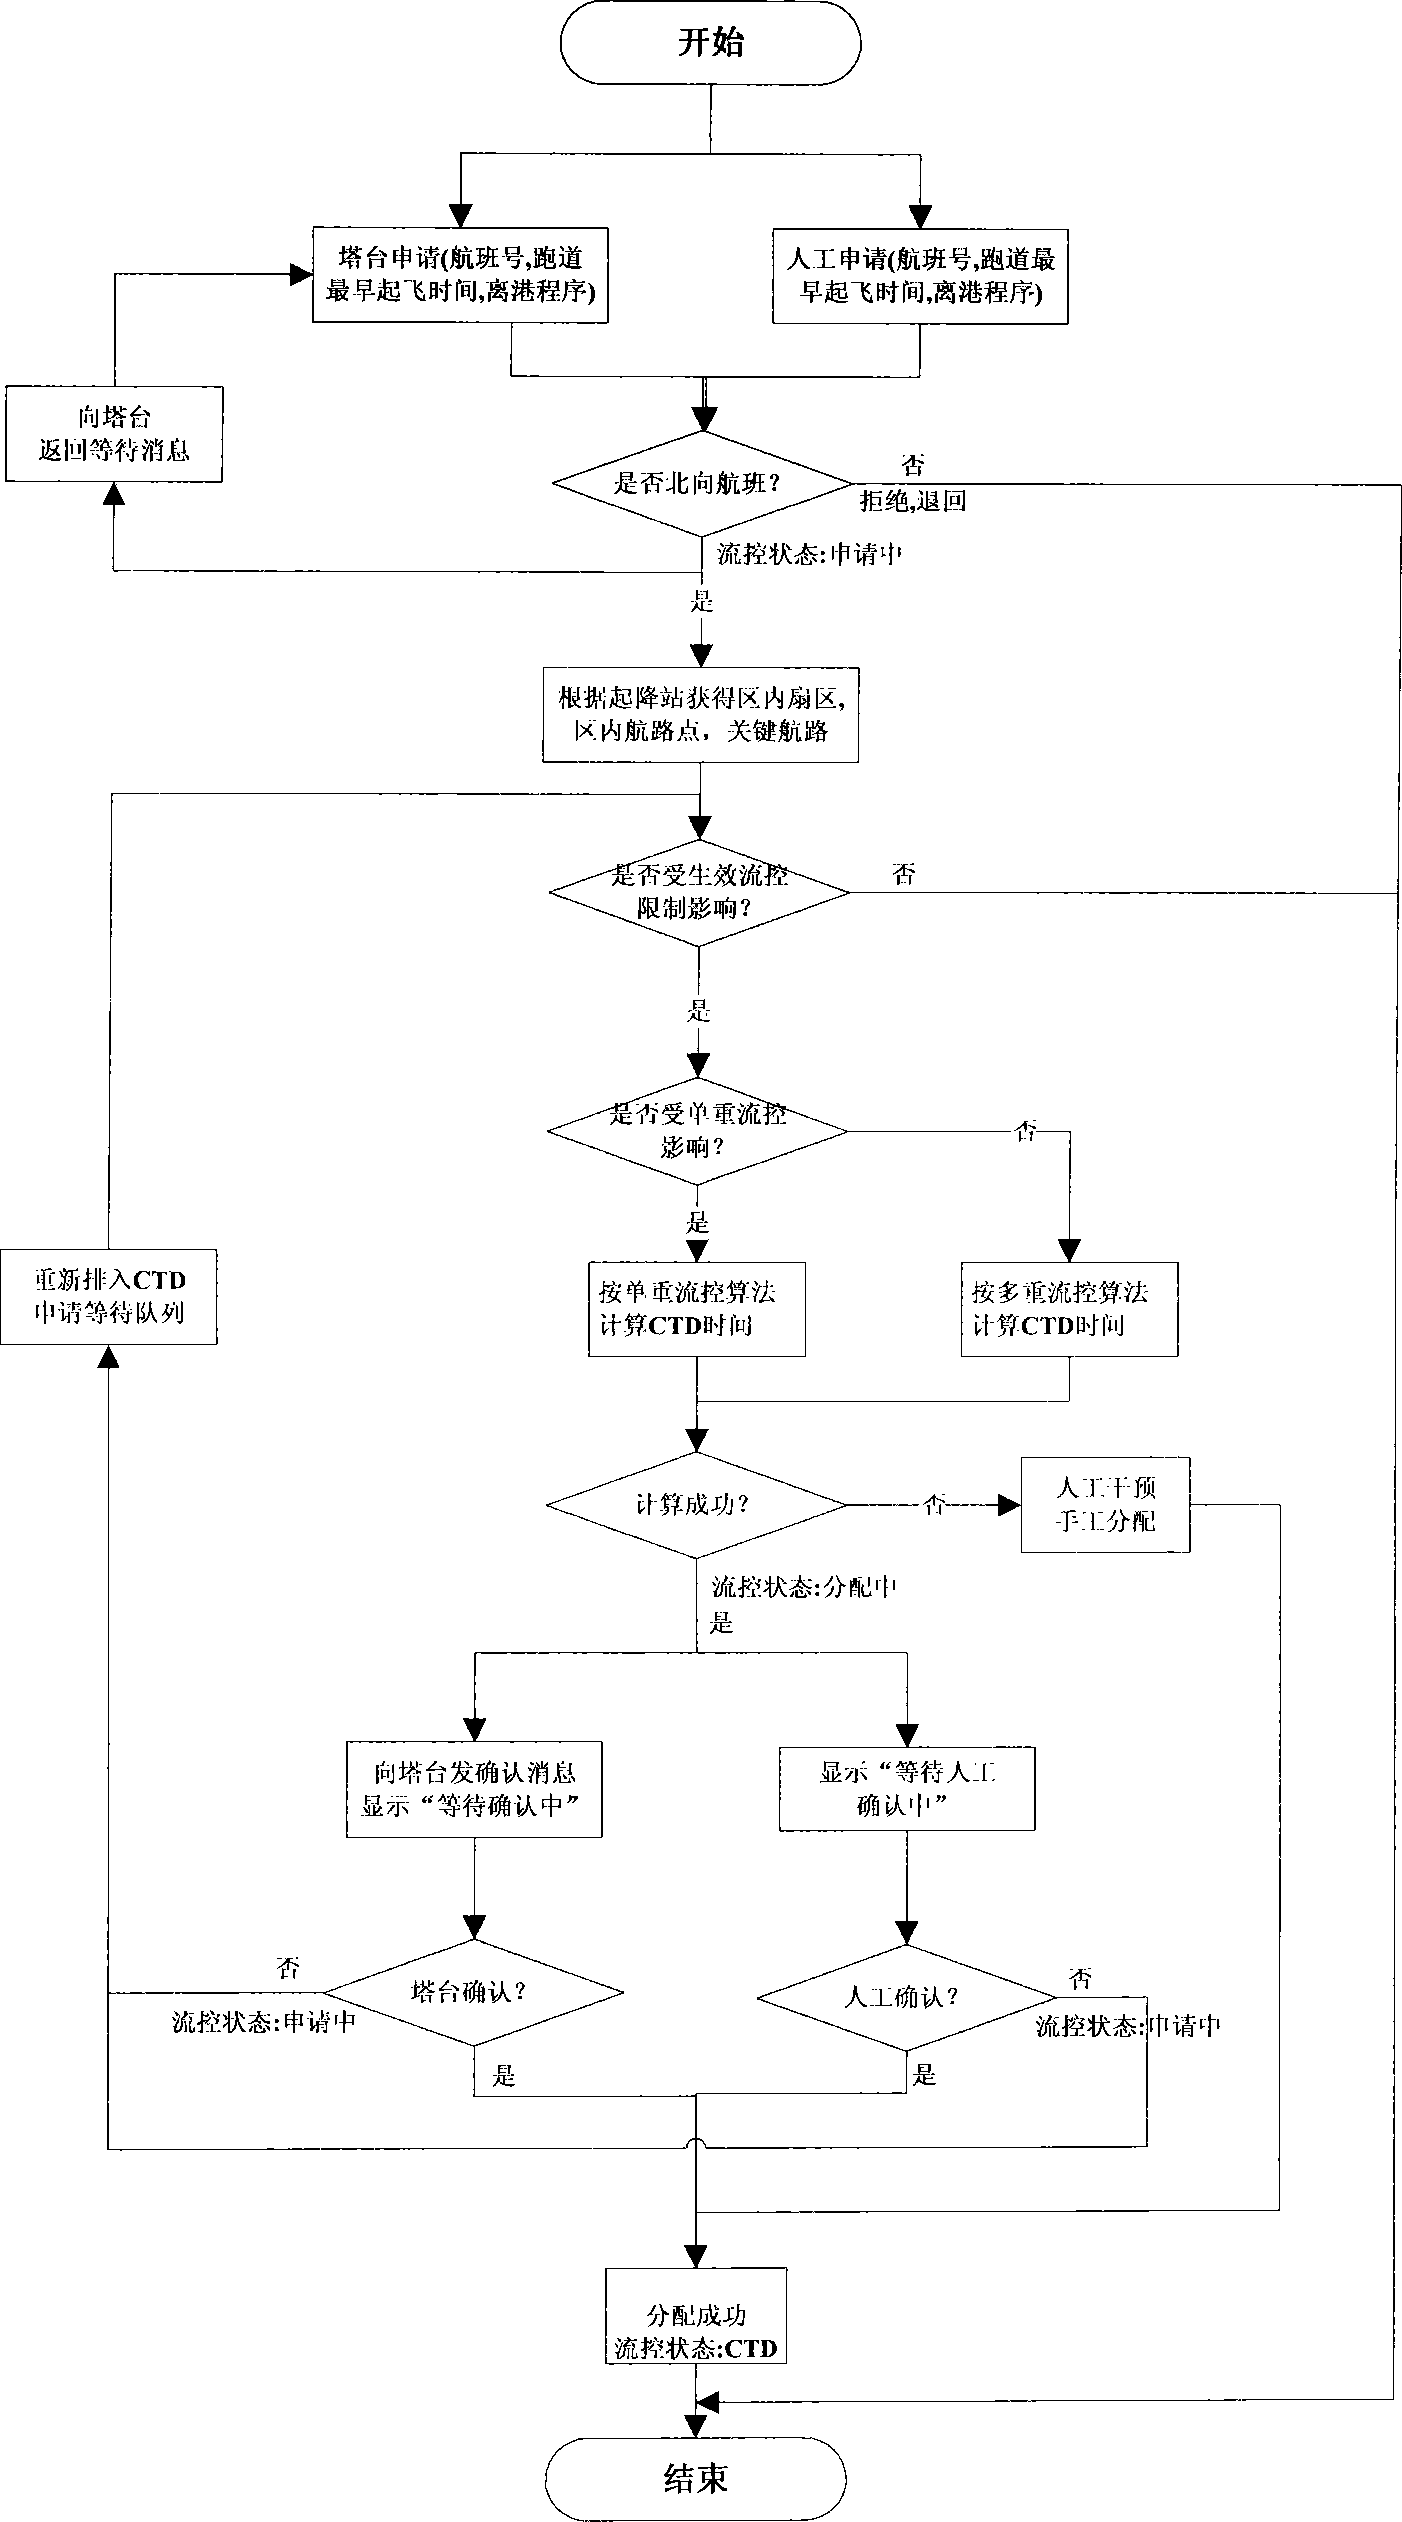 Management control method for accelerating flight traffic with computer